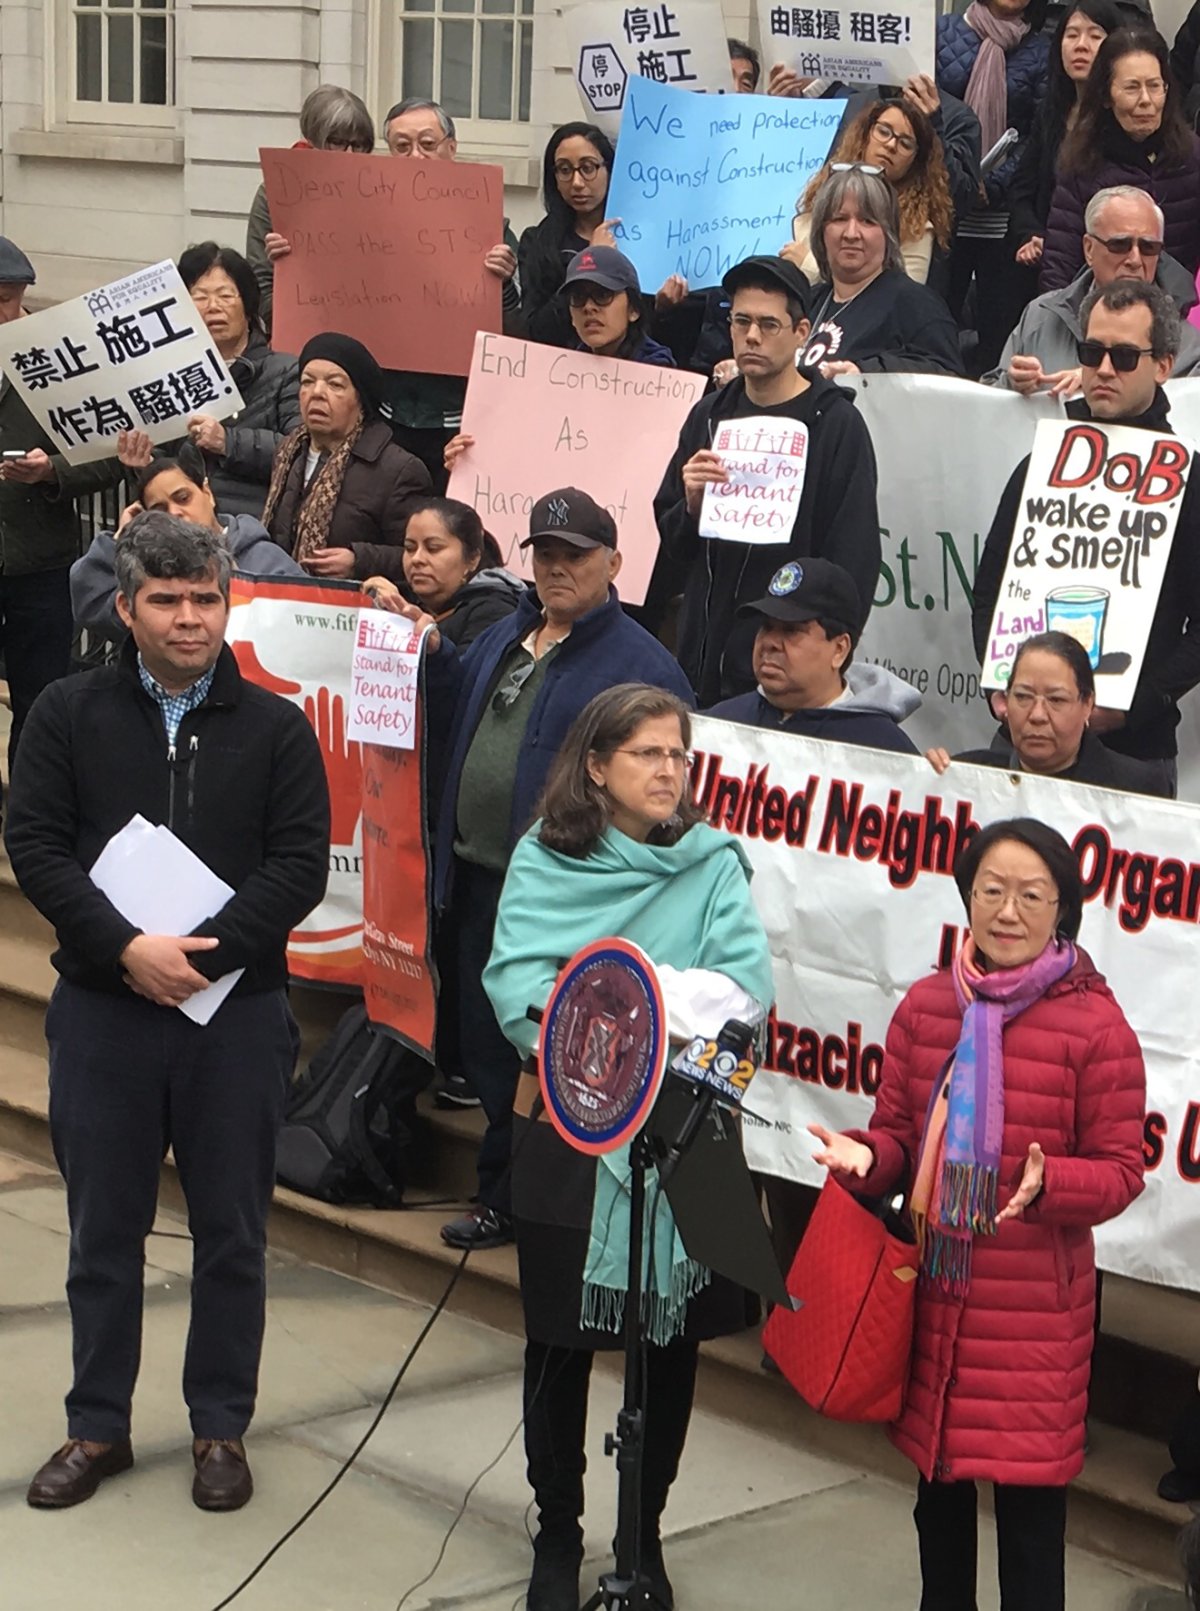 Margaret Chin, front row right, and Helen Rosenthal, to the left of her, were among the councilmembers at a City Hall rally last week calling for speedy passage of the S.T.S. package of anti-harassment bills. At left is Rolando Guzmán of Brooklyn’s St. Nick’s Alliance. Photo by Joaquin Cotler